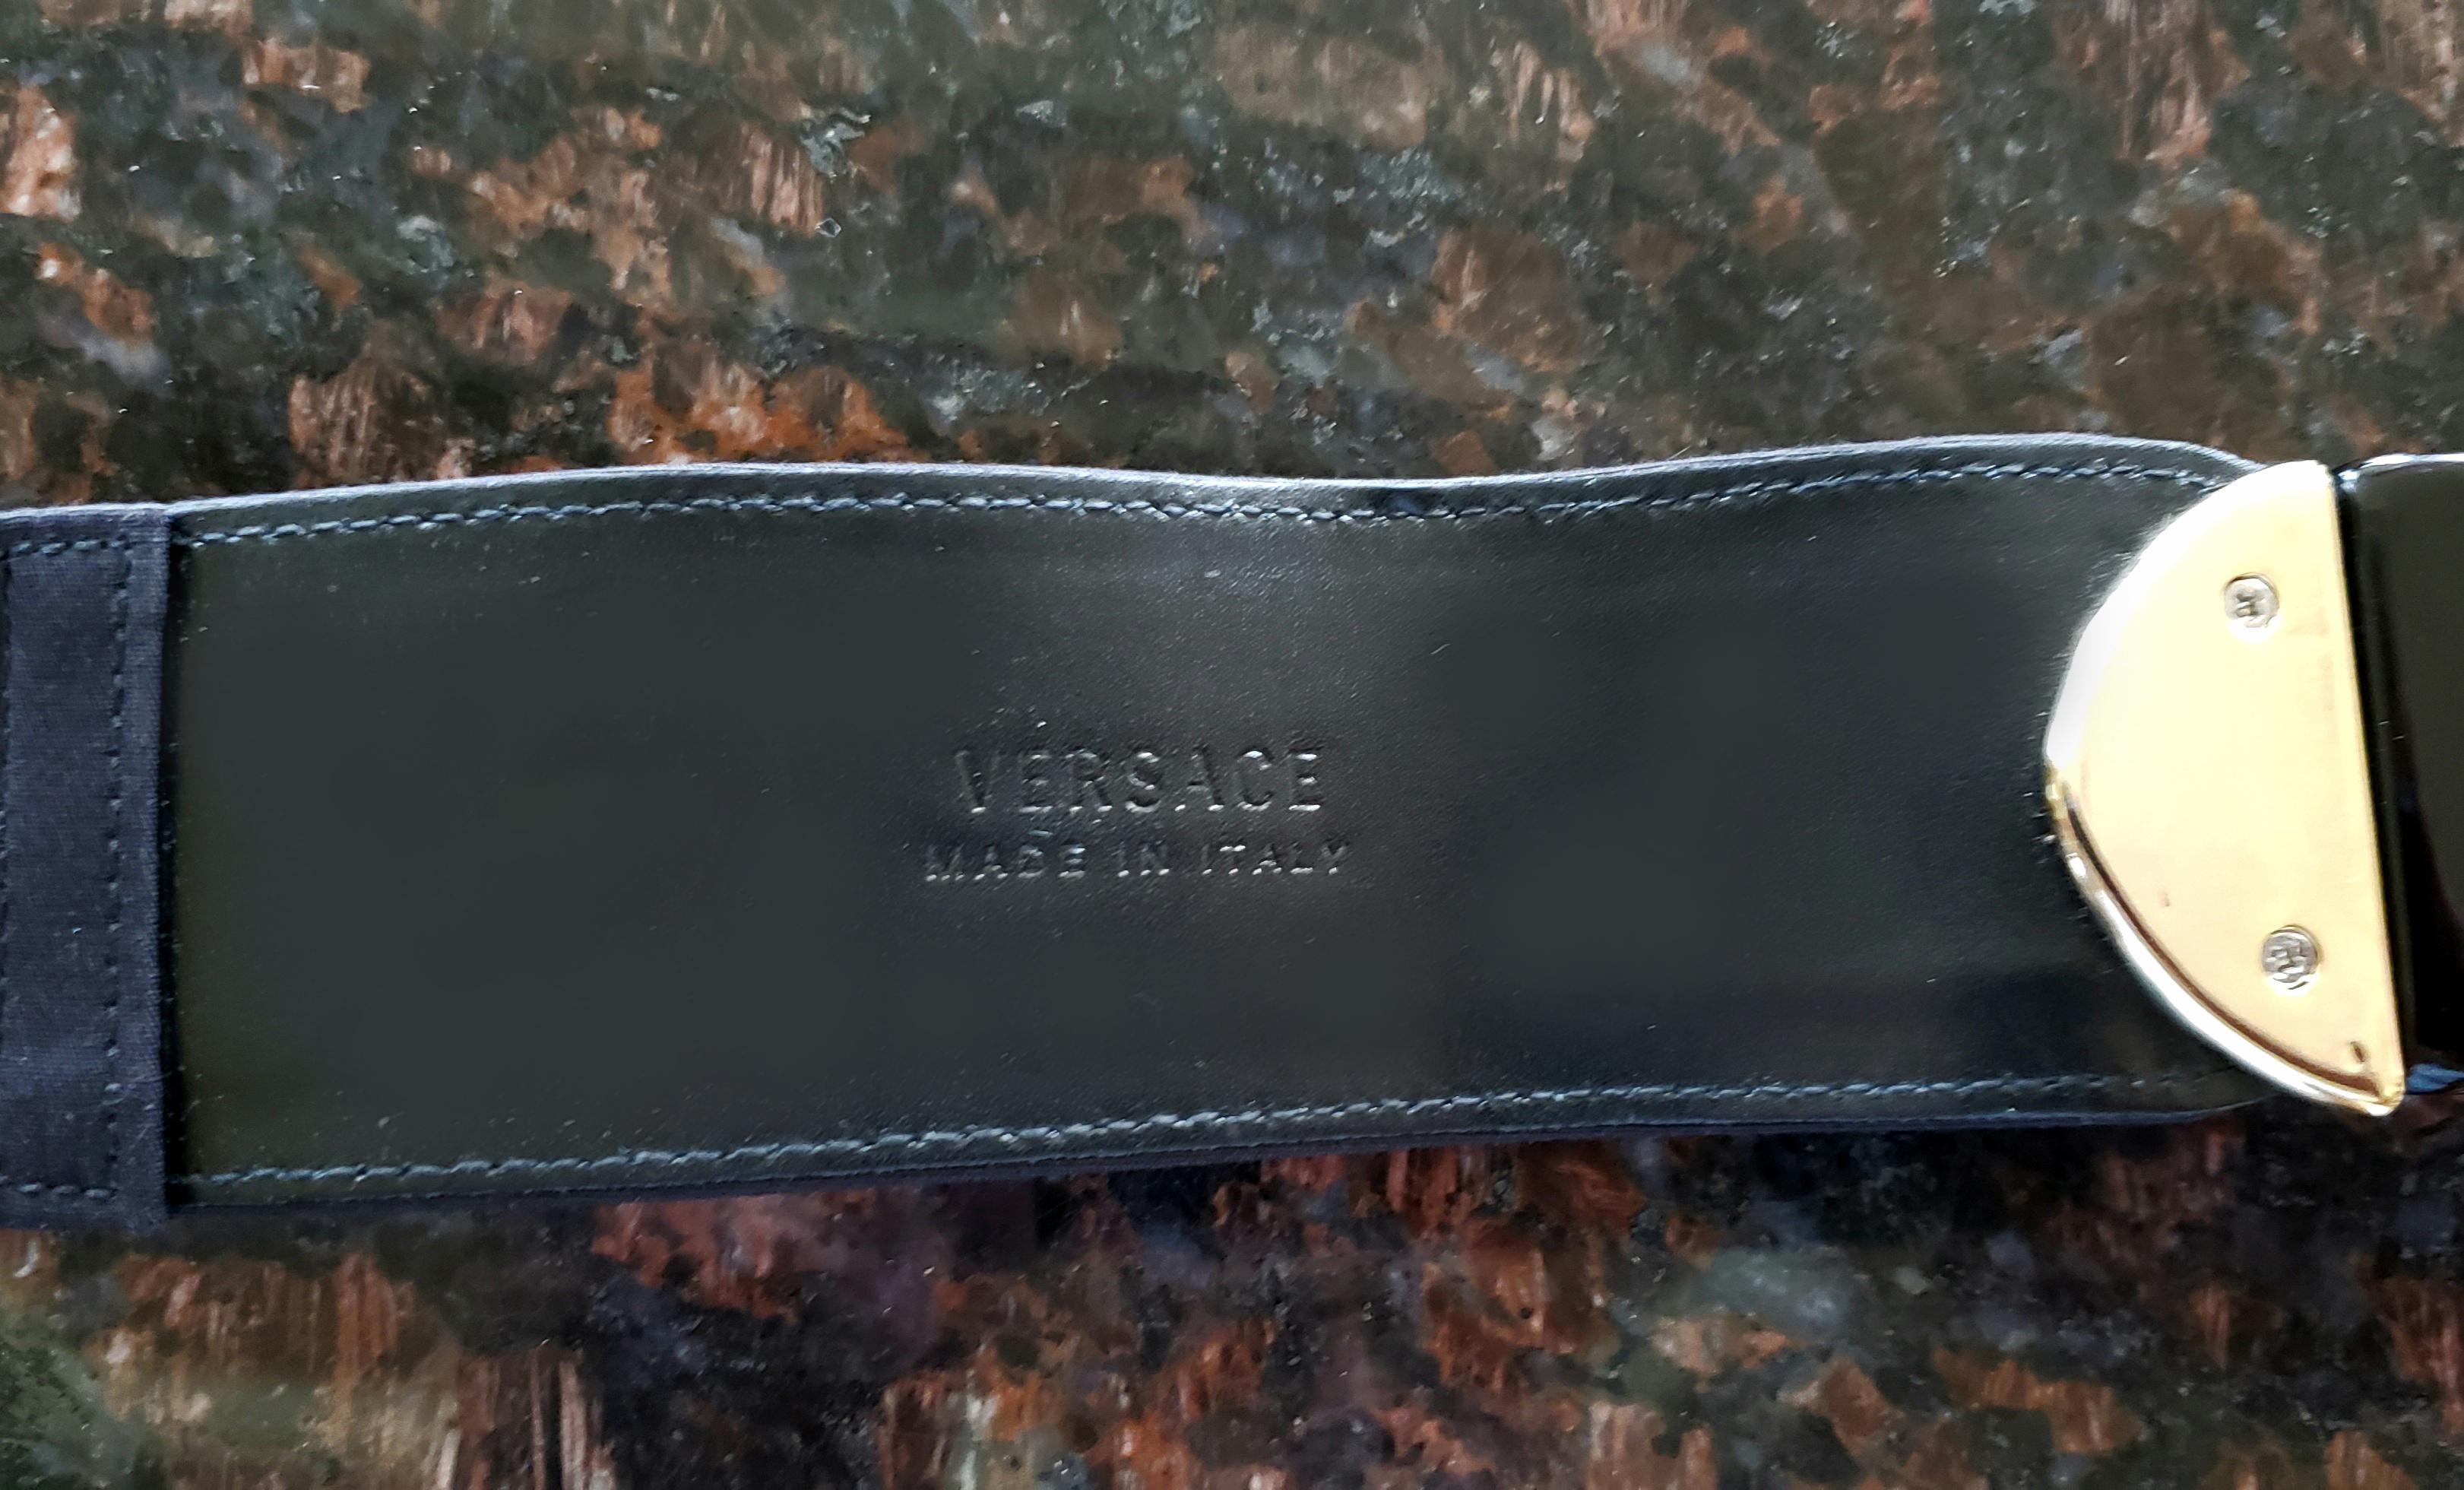 VERSACE BLACK LEATHER/FABRIC BELT w/MEDUSA HEAD PLASTIC BUCKLE size 42 and 44 In New Condition For Sale In Montgomery, TX